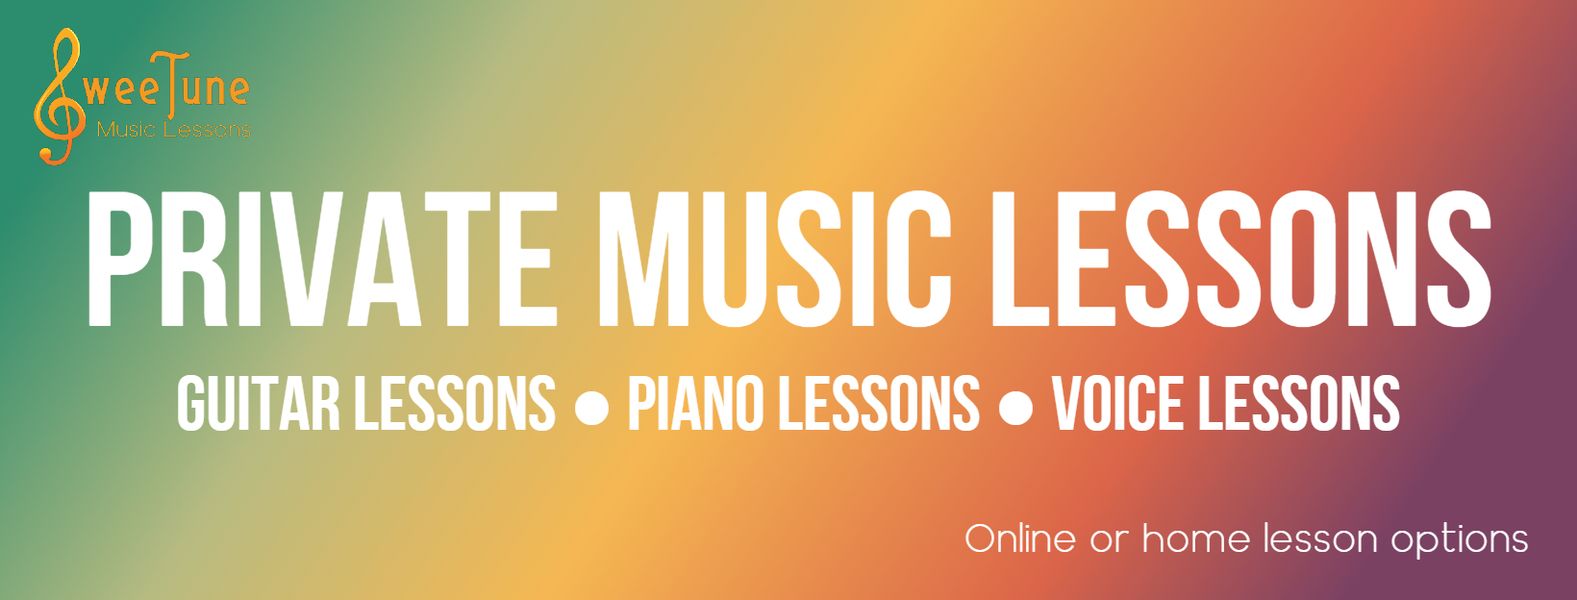 SweeTune Music Lessons